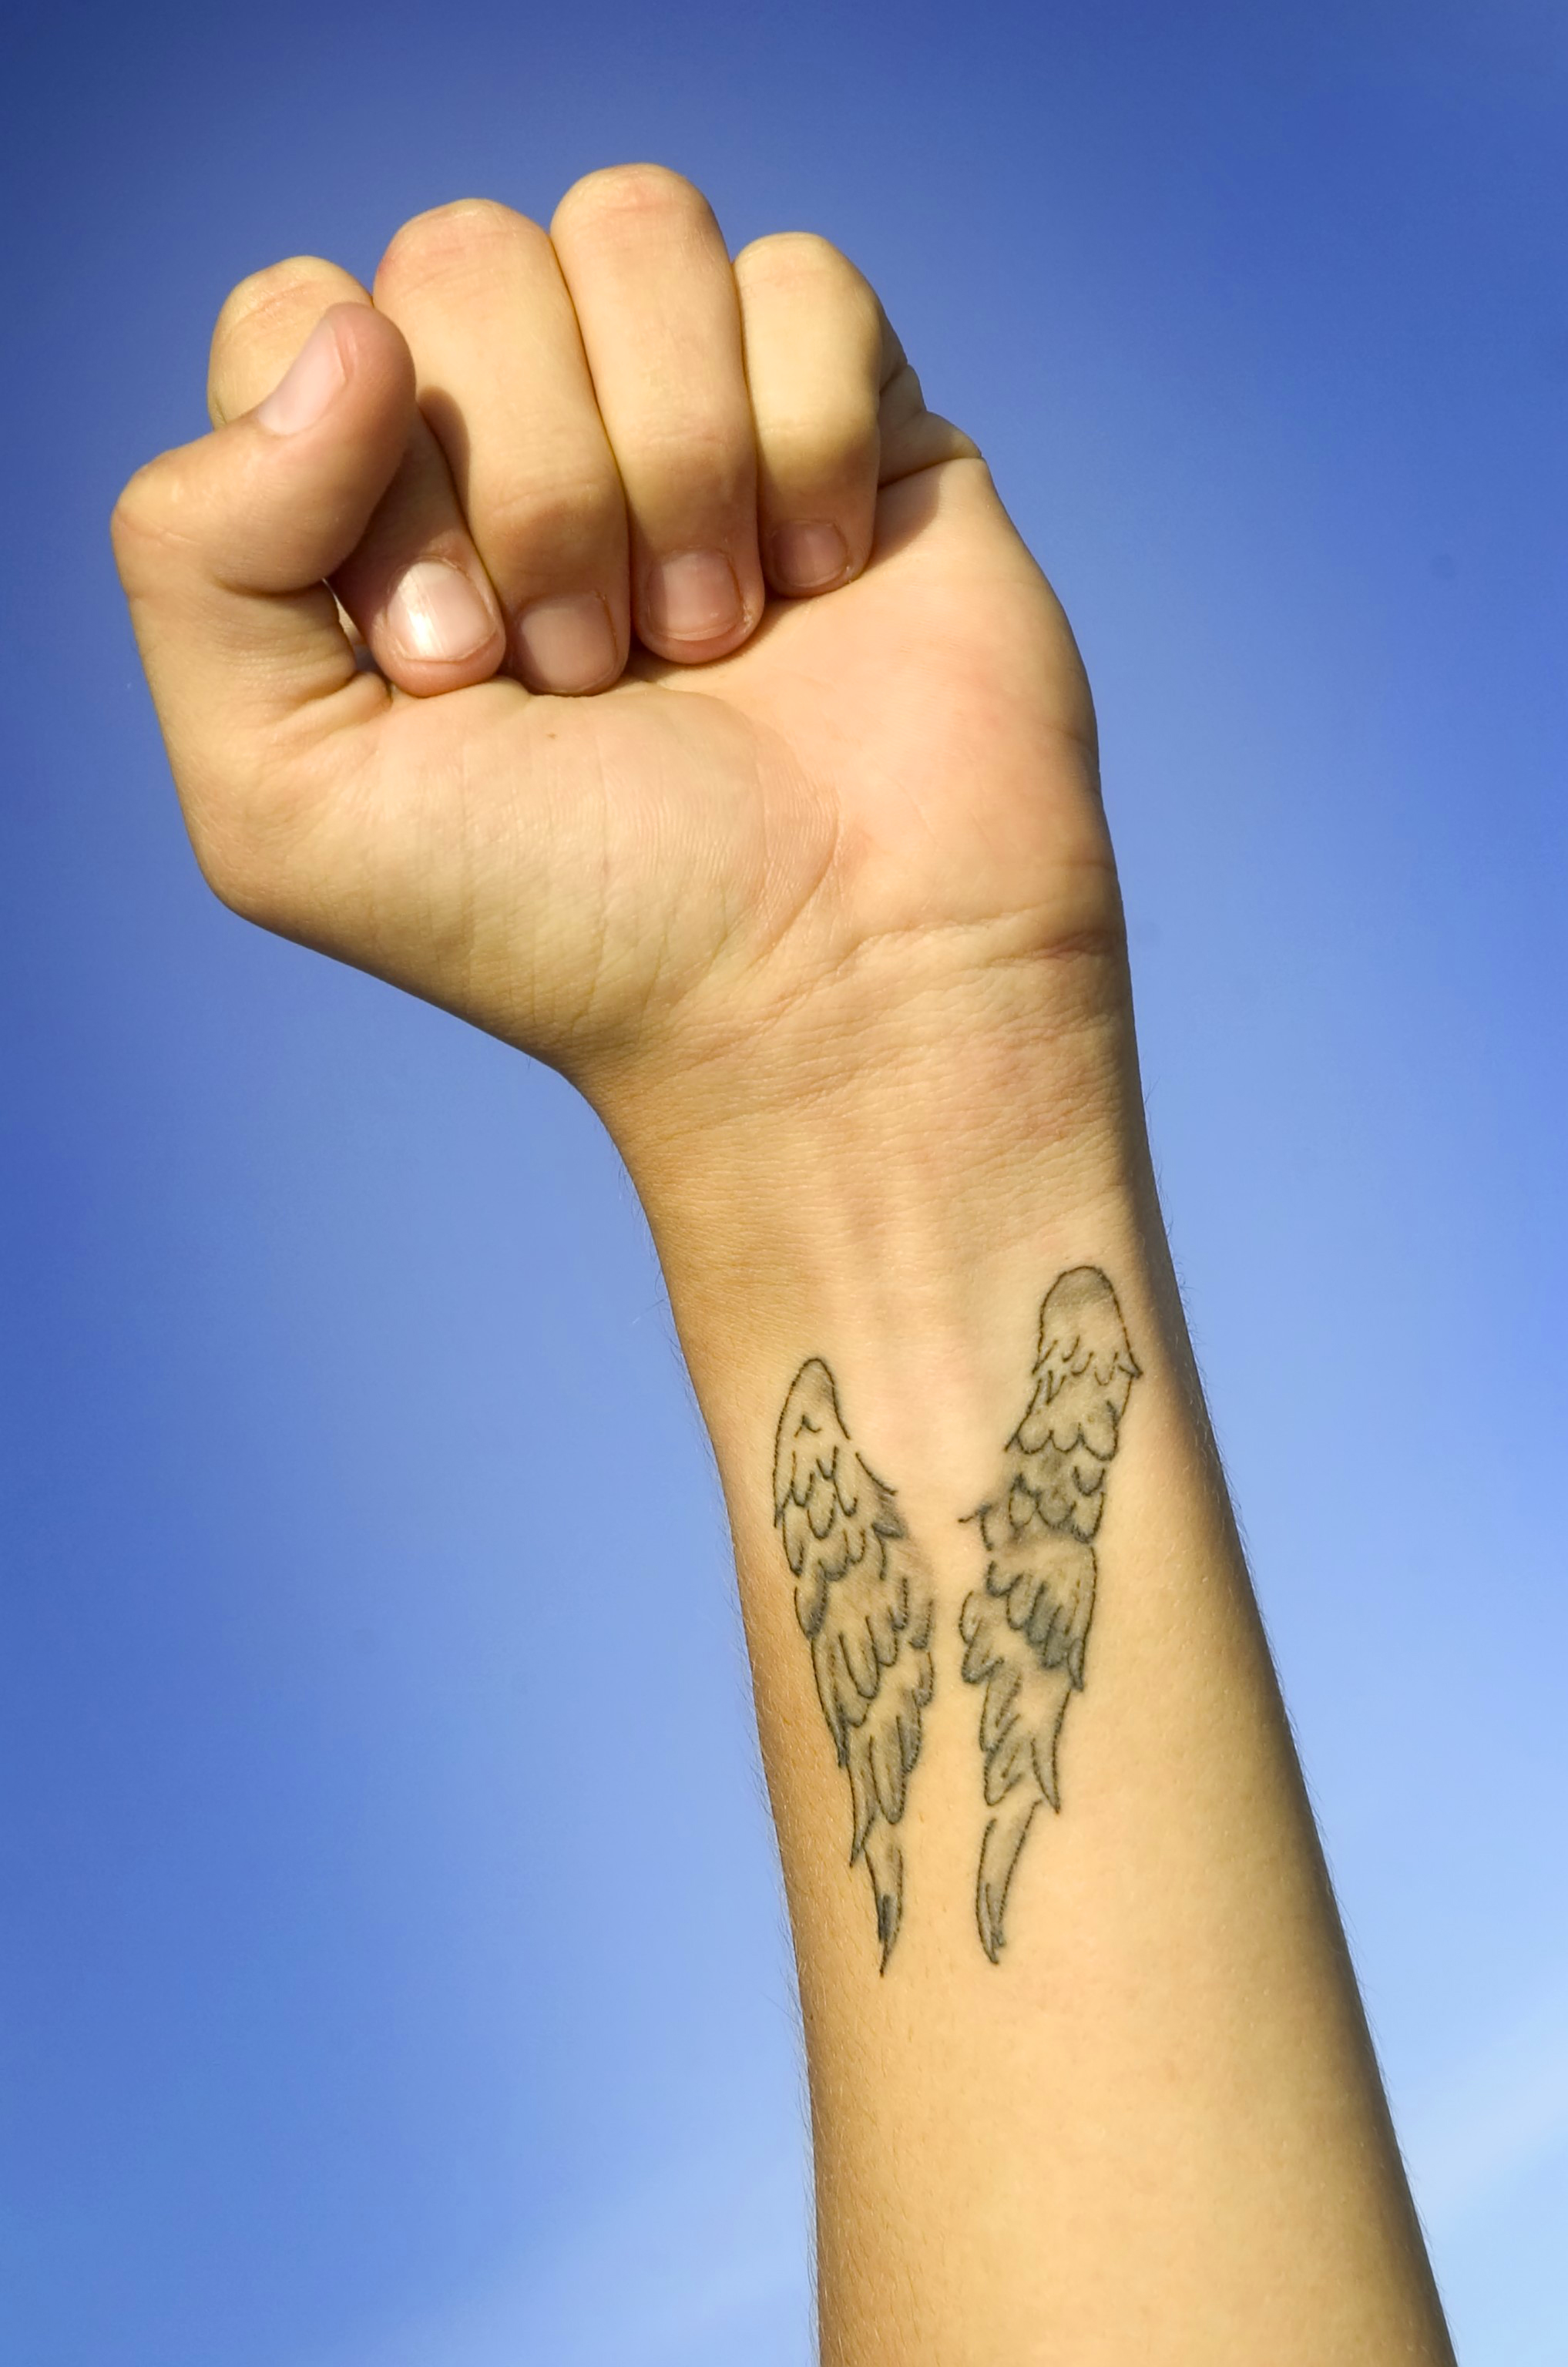 These 10 simple tattoos are making me want to get inked immediately - Her.ie